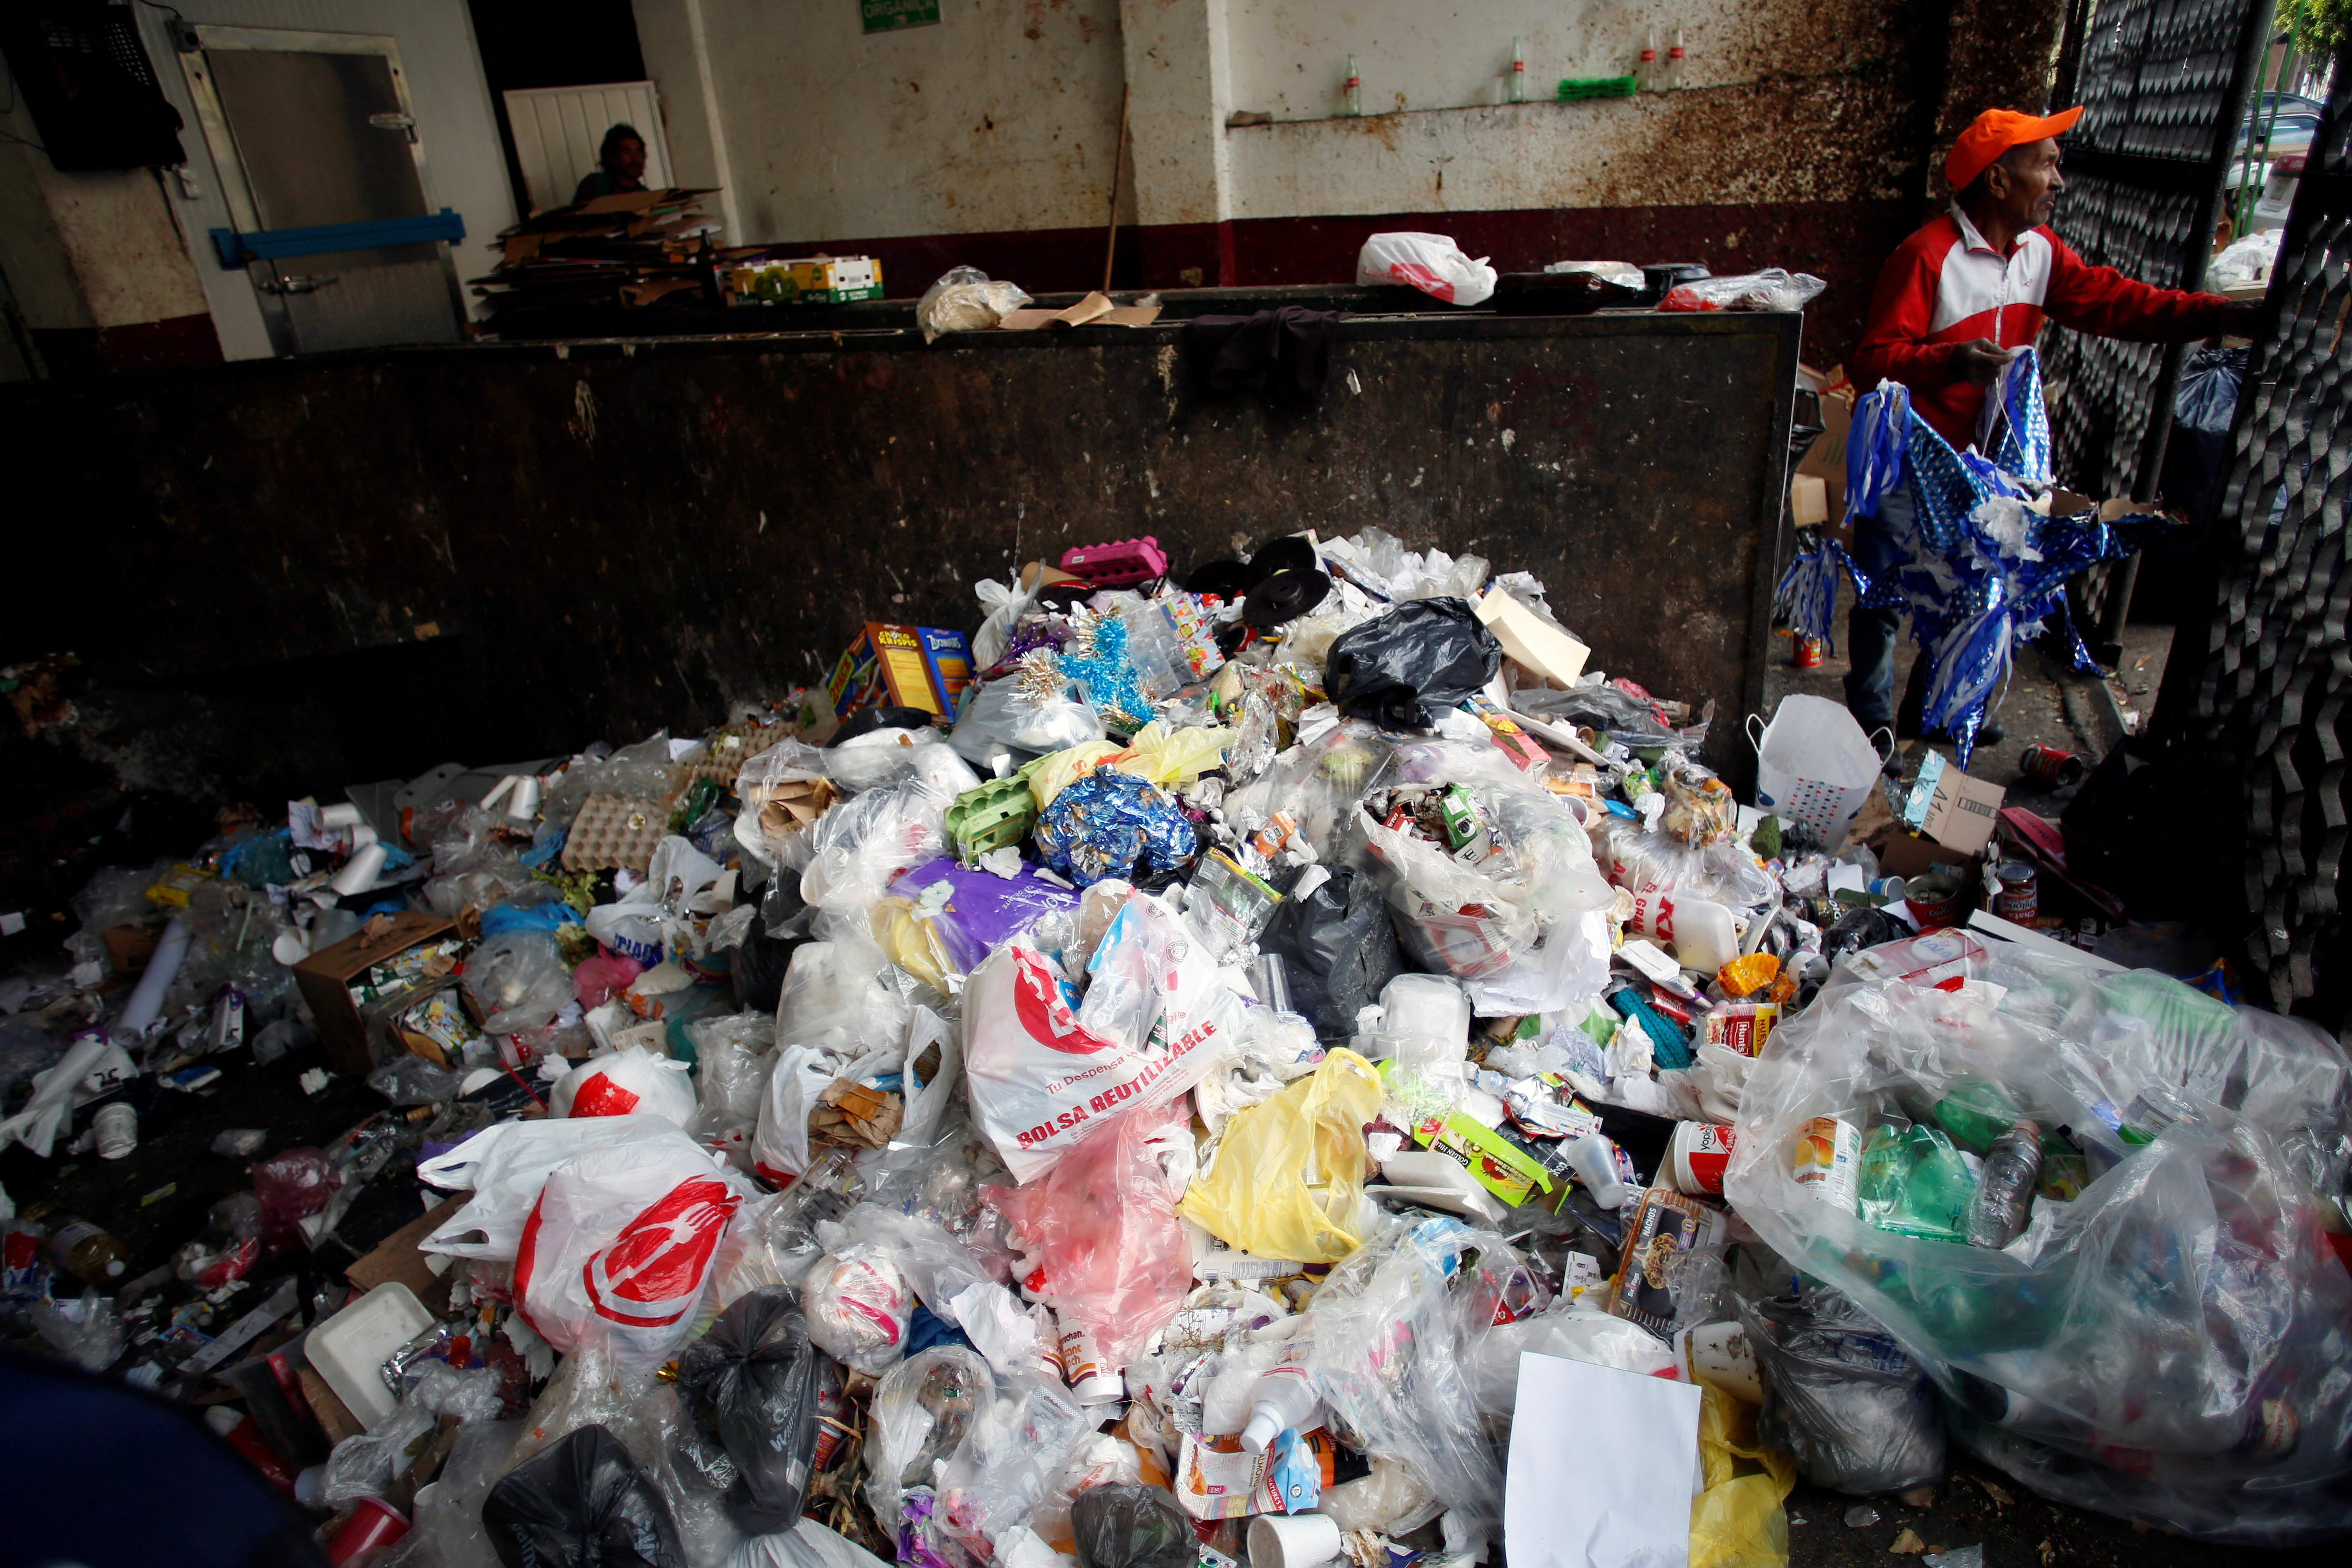 A man stands next to a pile of plastic garbage at a market which no longer provides plastic bags for customers to carry products, in Mexico City